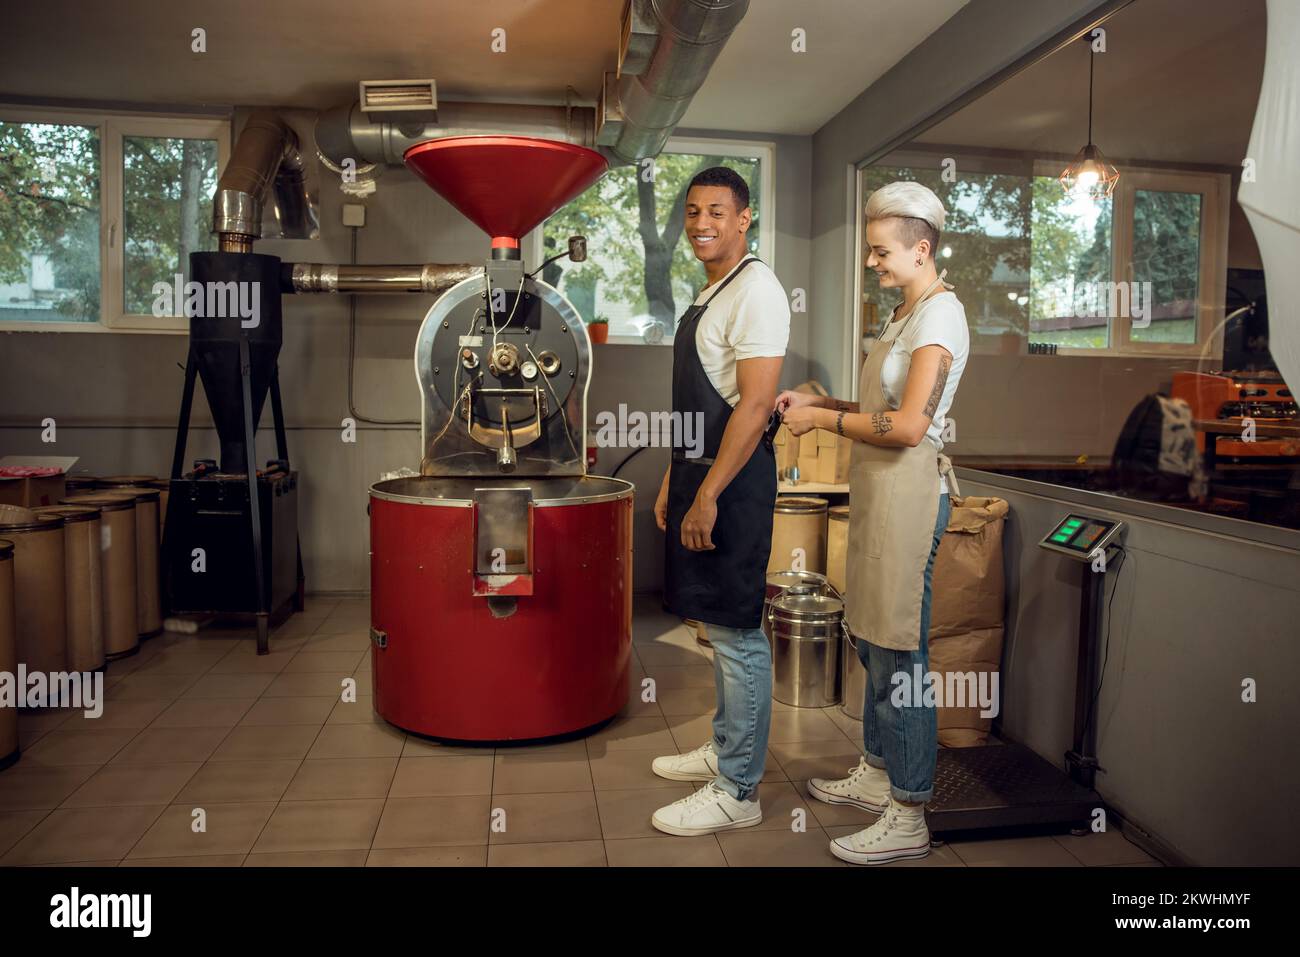 Two cheerful roast masters preparing for work Stock Photo